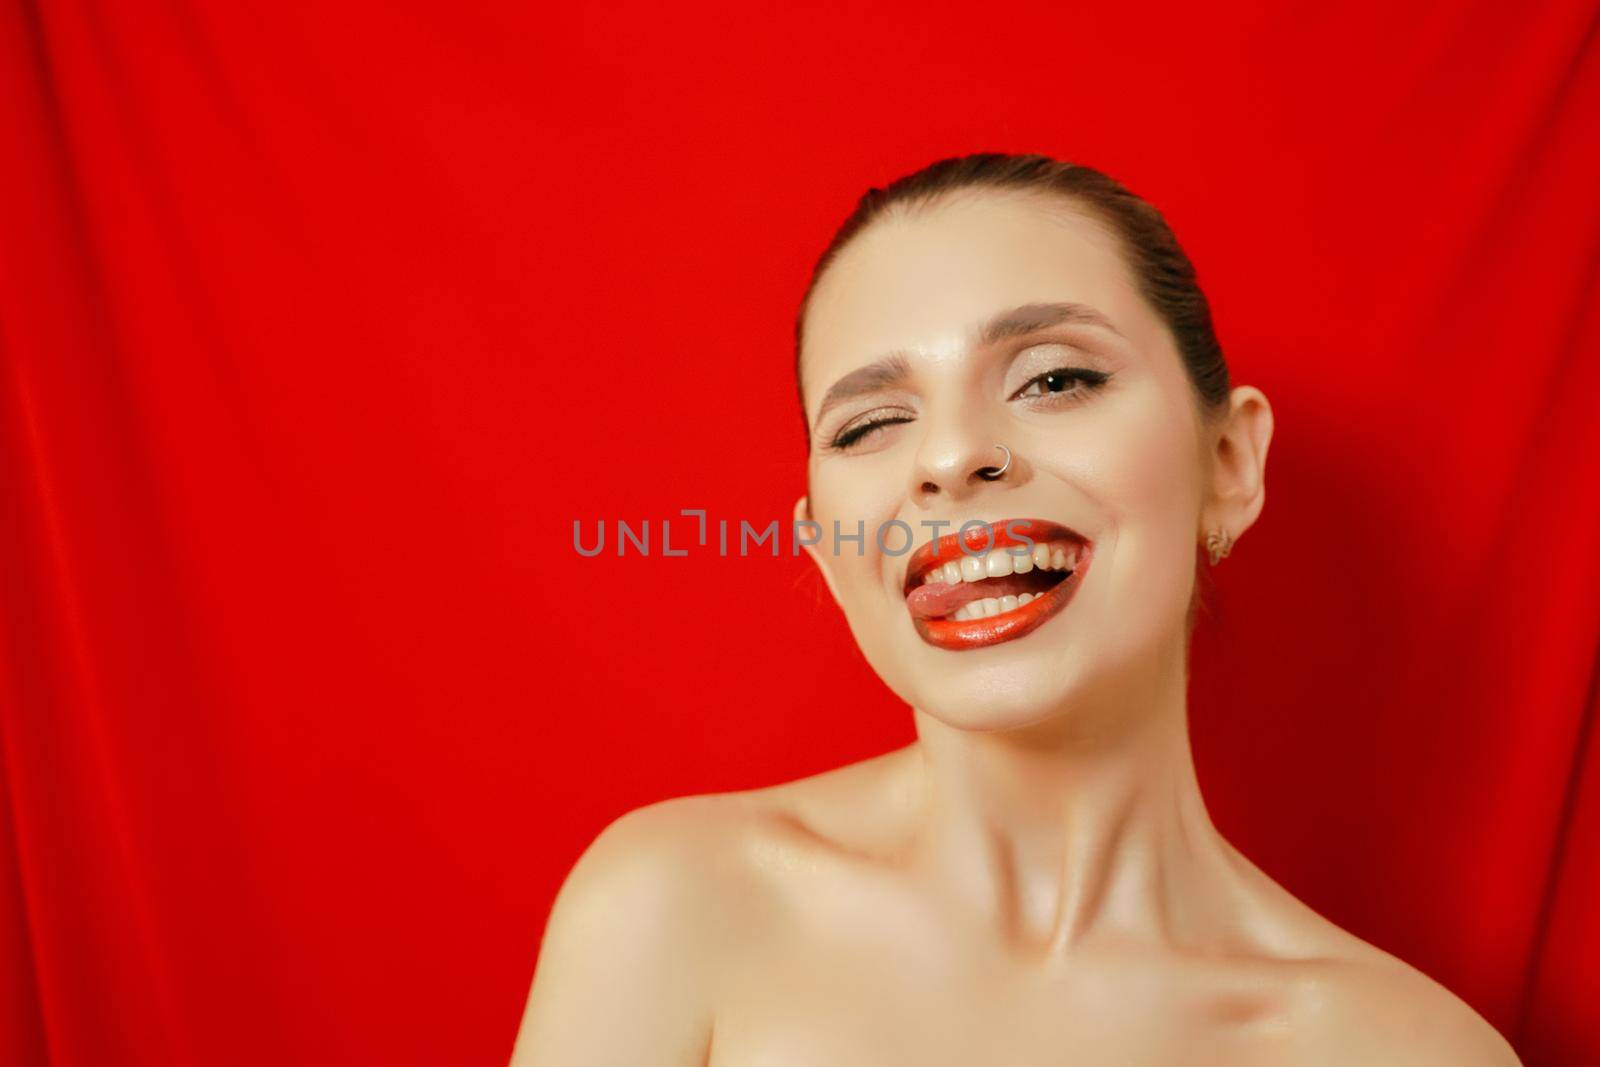 Portrait of a smiling beautiful young woman. Red background. Studio shot